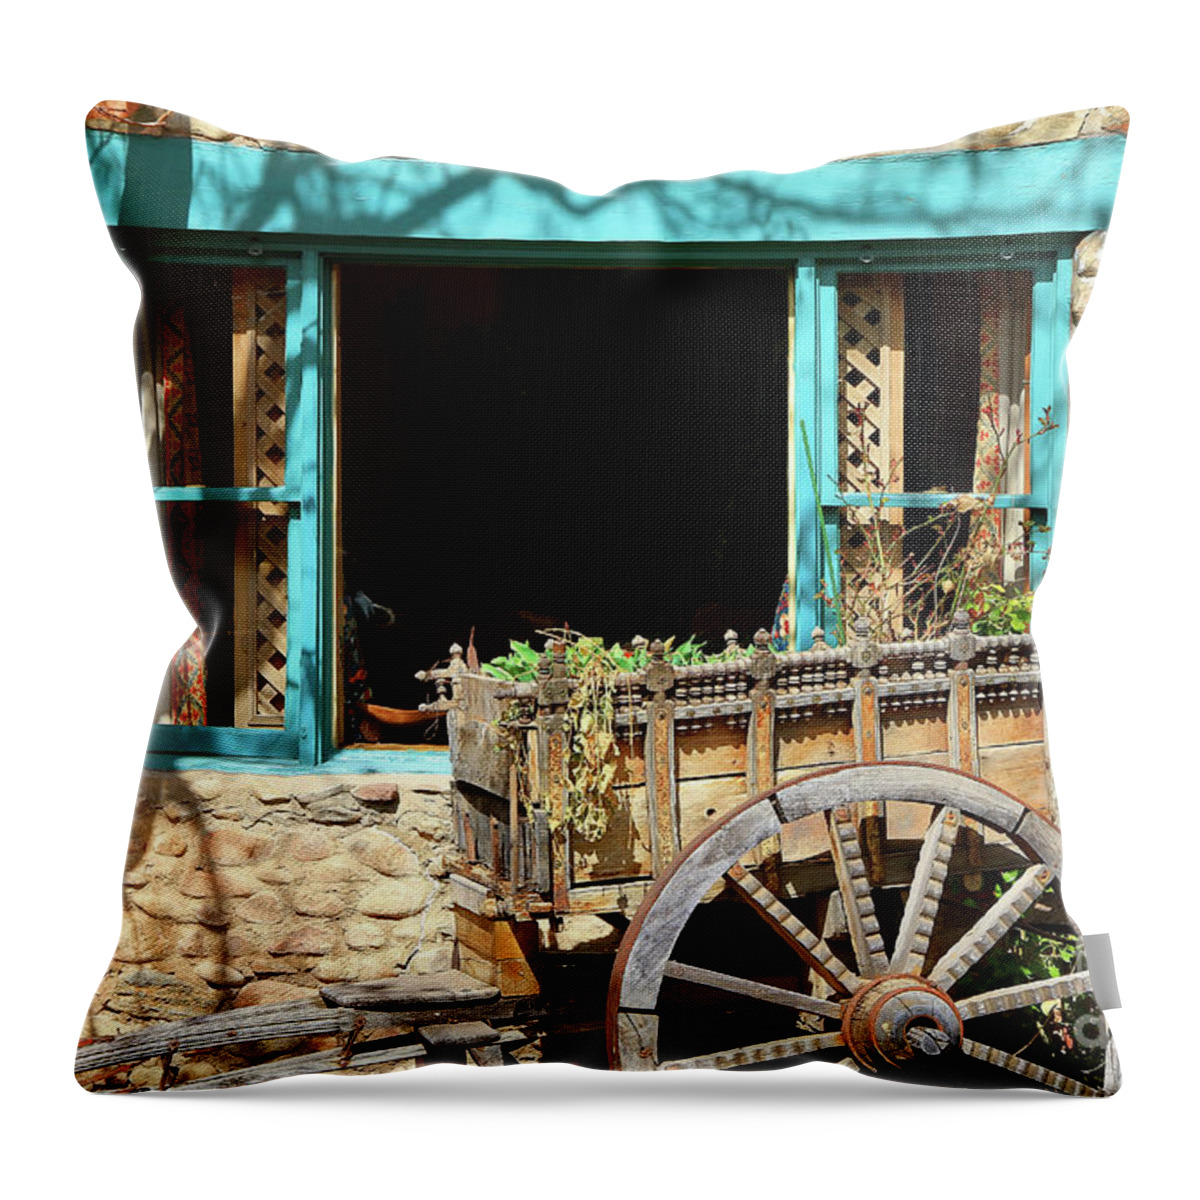 Architecture Throw Pillow featuring the photograph Santa Fe Impression 3 by Teresa Zieba